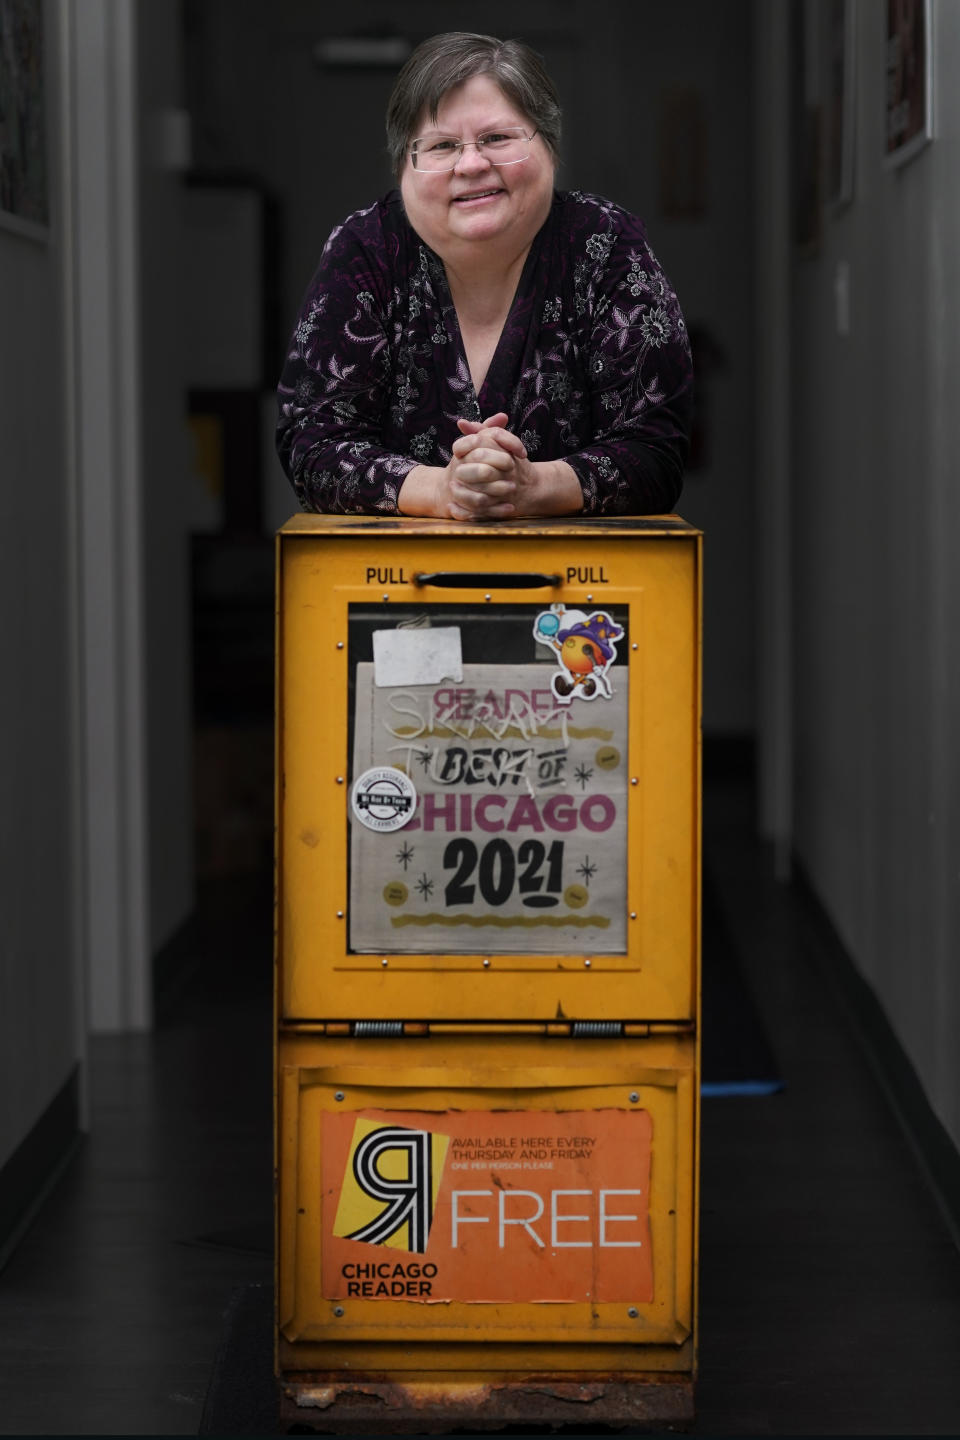 Tracy Baim, publisher of the Chicago Reader weekly newspaper stands for a portrait at her office with a weather beaten newspaper box Monday, May 9, 2022, in Chicago. The Reader is expected to become a nonprofit this month after the sale was nearly derailed over co-owner Leonard Goodman's column opposing COVID-19 vaccine requirements for children. Baim said editors asked to hire an independent fact-checker to vet the column. Baim said she and her co-publisher then met with Goodman and discussed options, but "it was very clear he didn't like any" of their proposals. (AP Photo/Charles Rex Arbogast)